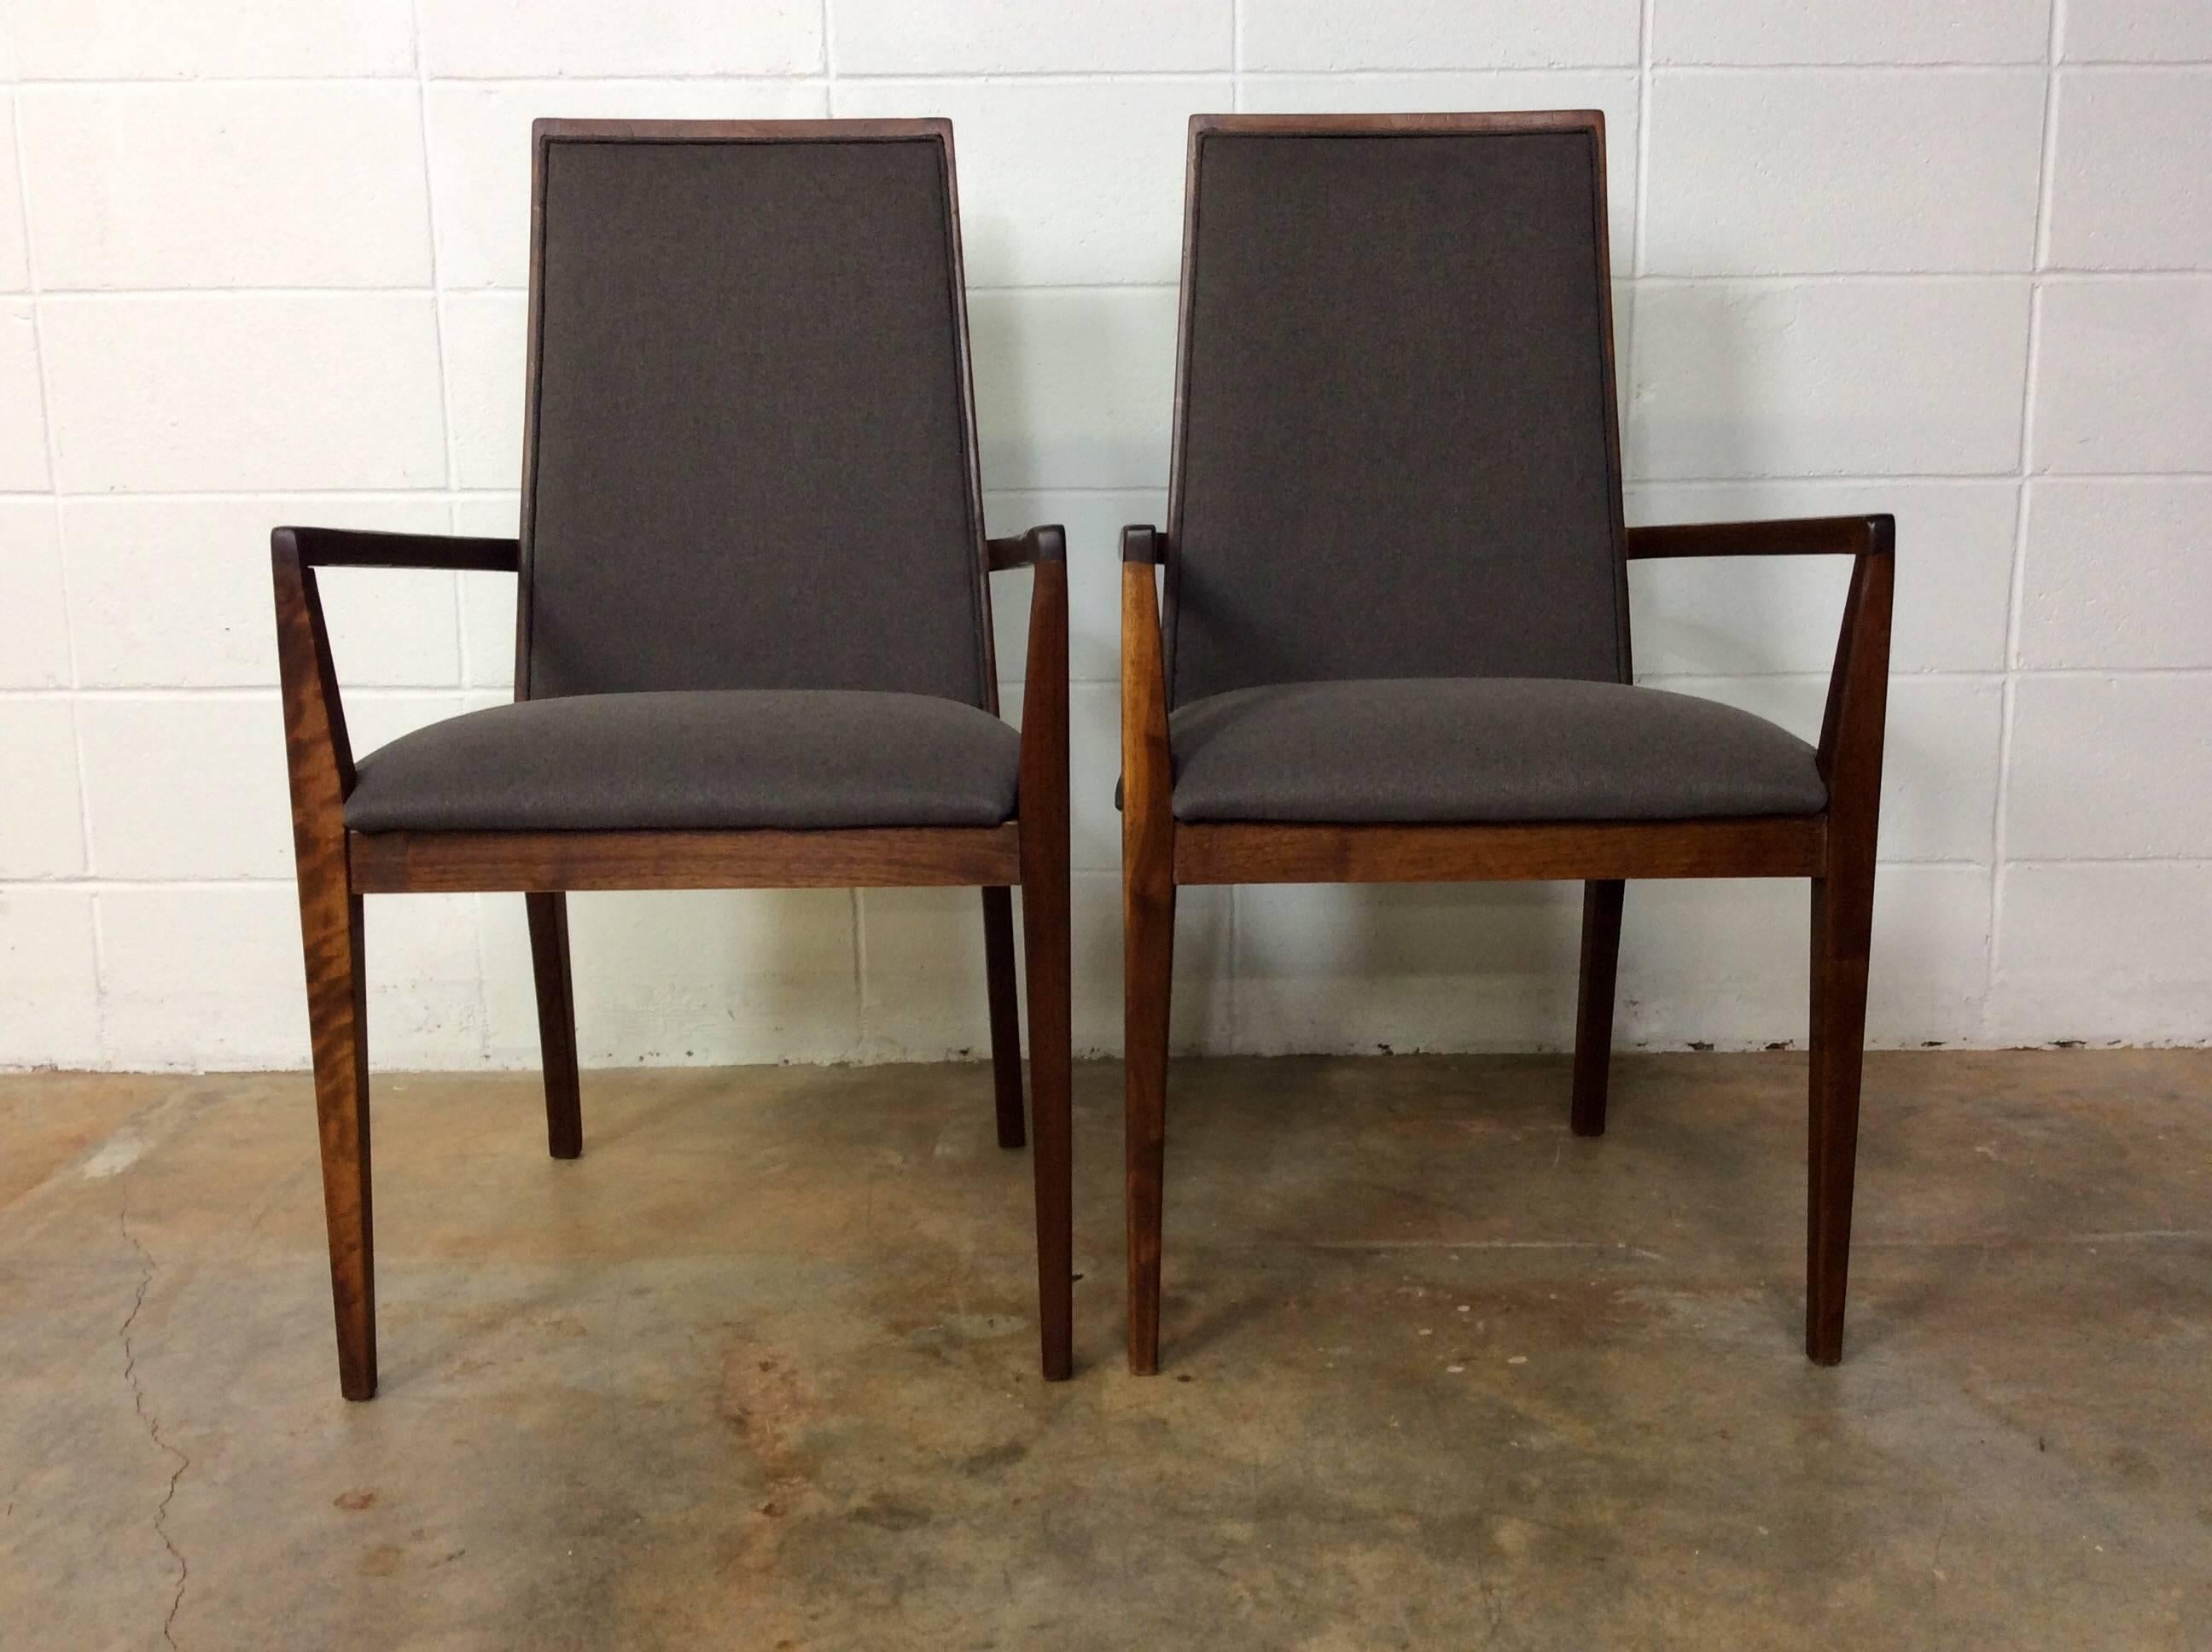 Set of four Mid-Century Modern dining chairs manufactured by Dillingham. There are two side chairs and two armchairs. This design is often attributed to Milo Baughman or Merton Gershun. While we cannot confirm who actually designed them, we can